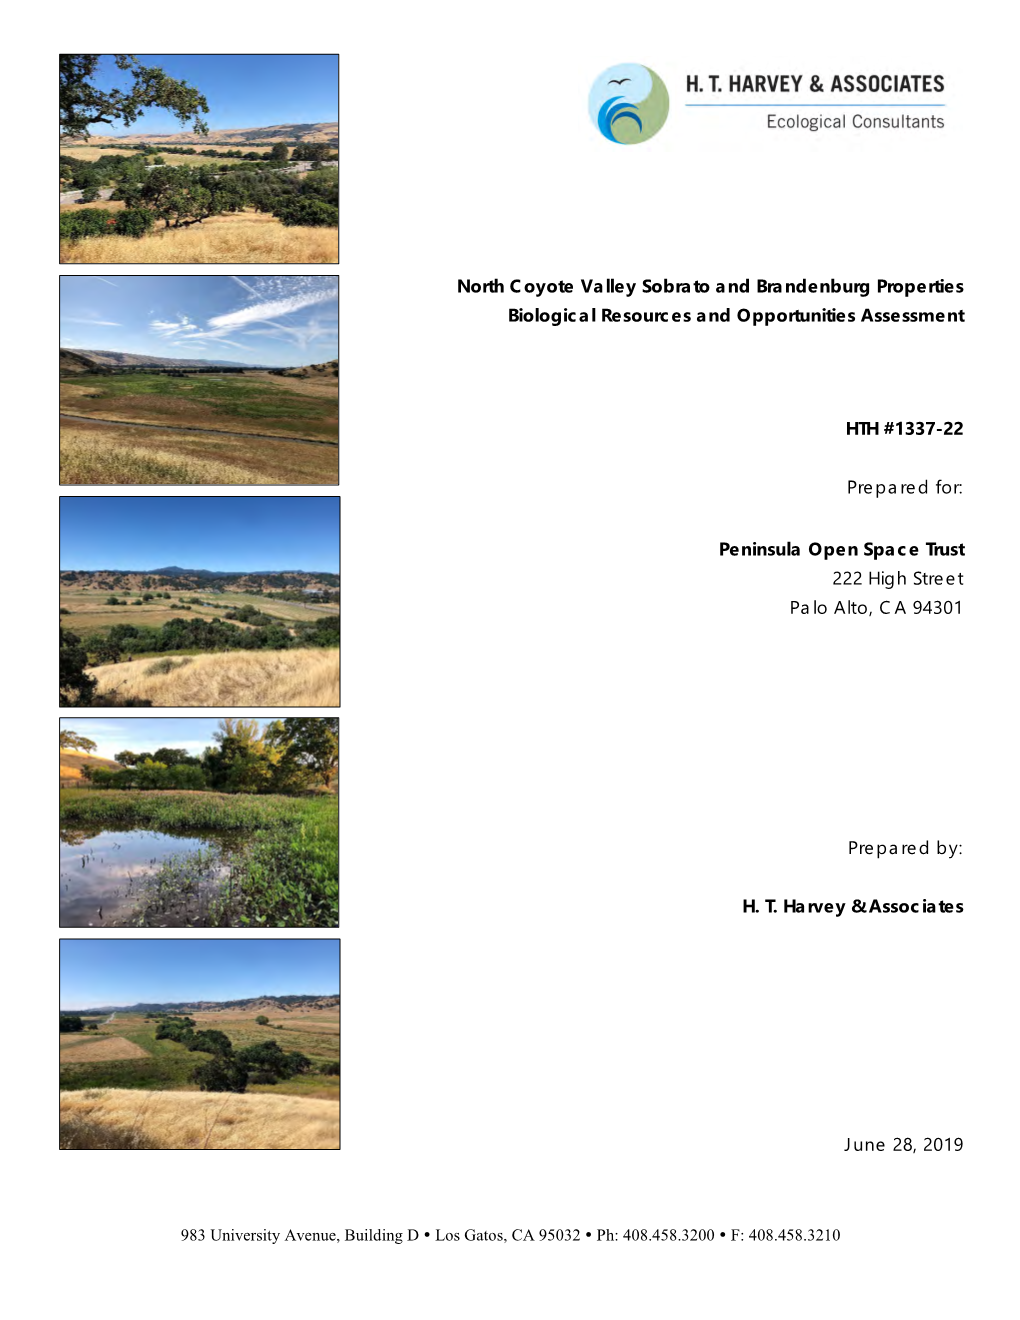 North Coyote Valley Sobrato and Brandenburg Properties Biological Resources and Opportunities Assessment